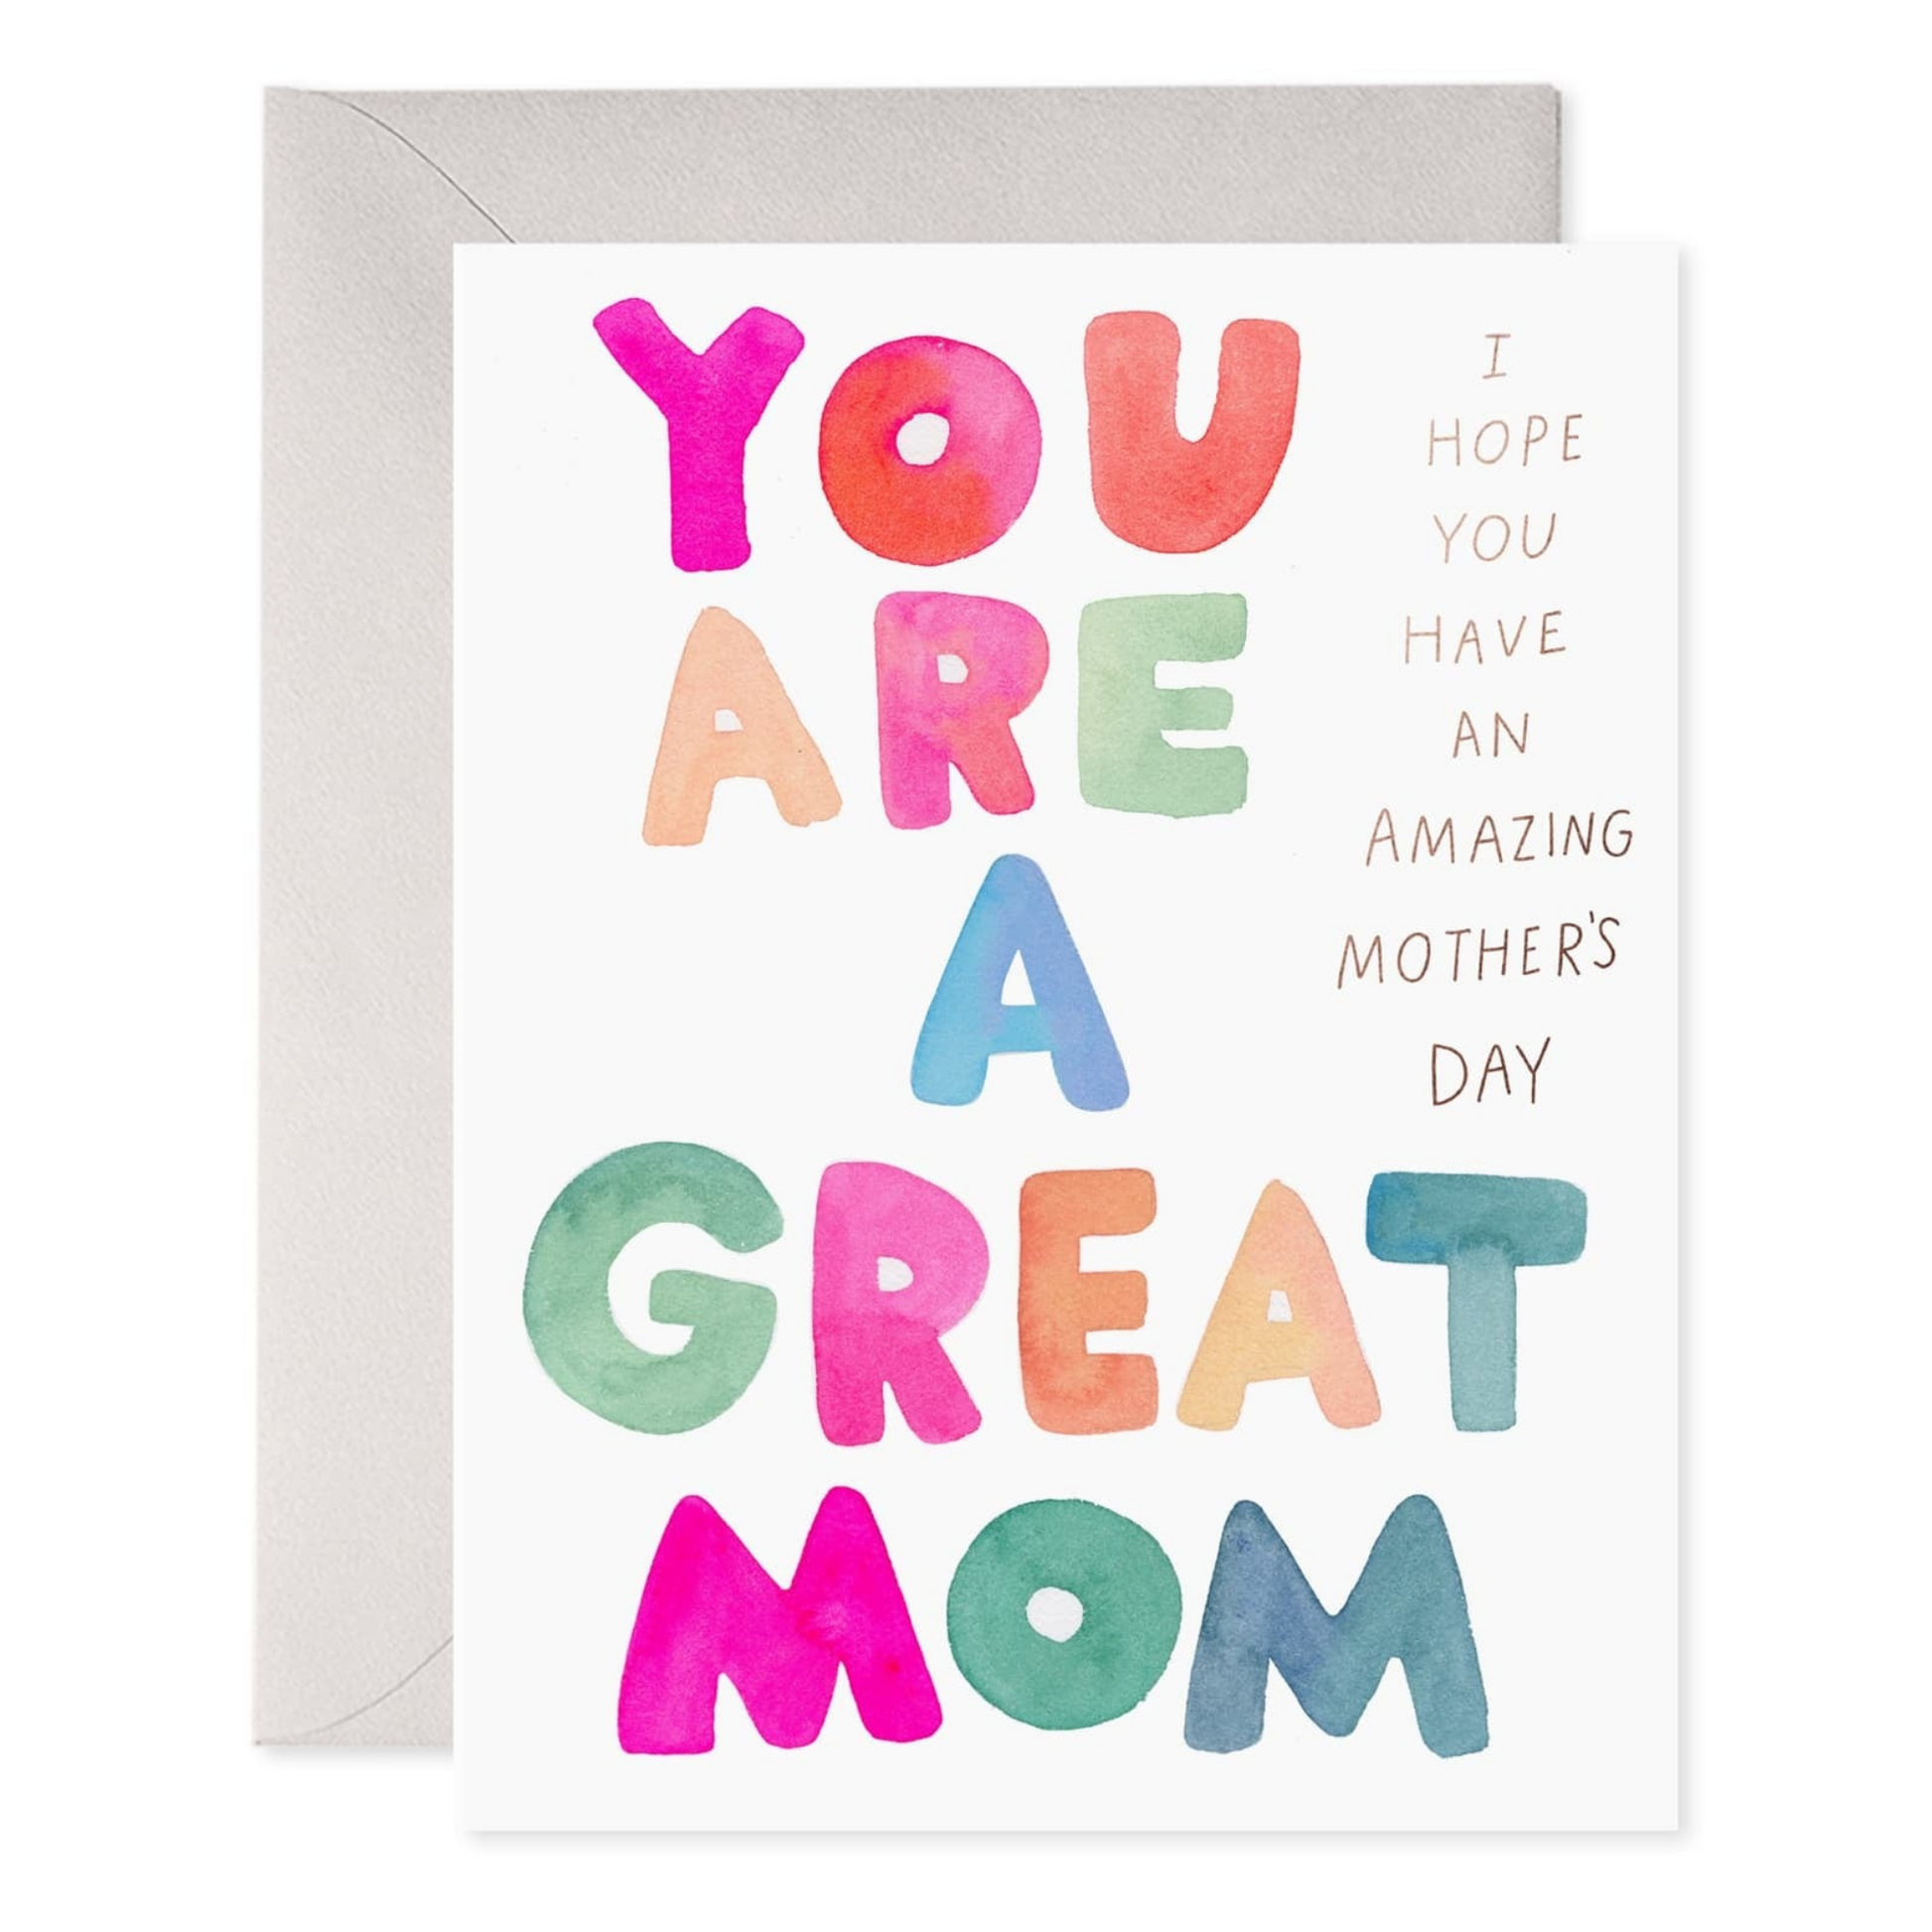 greeting card with "you are a great mom, i hope you have an amazing mother's day" message on front